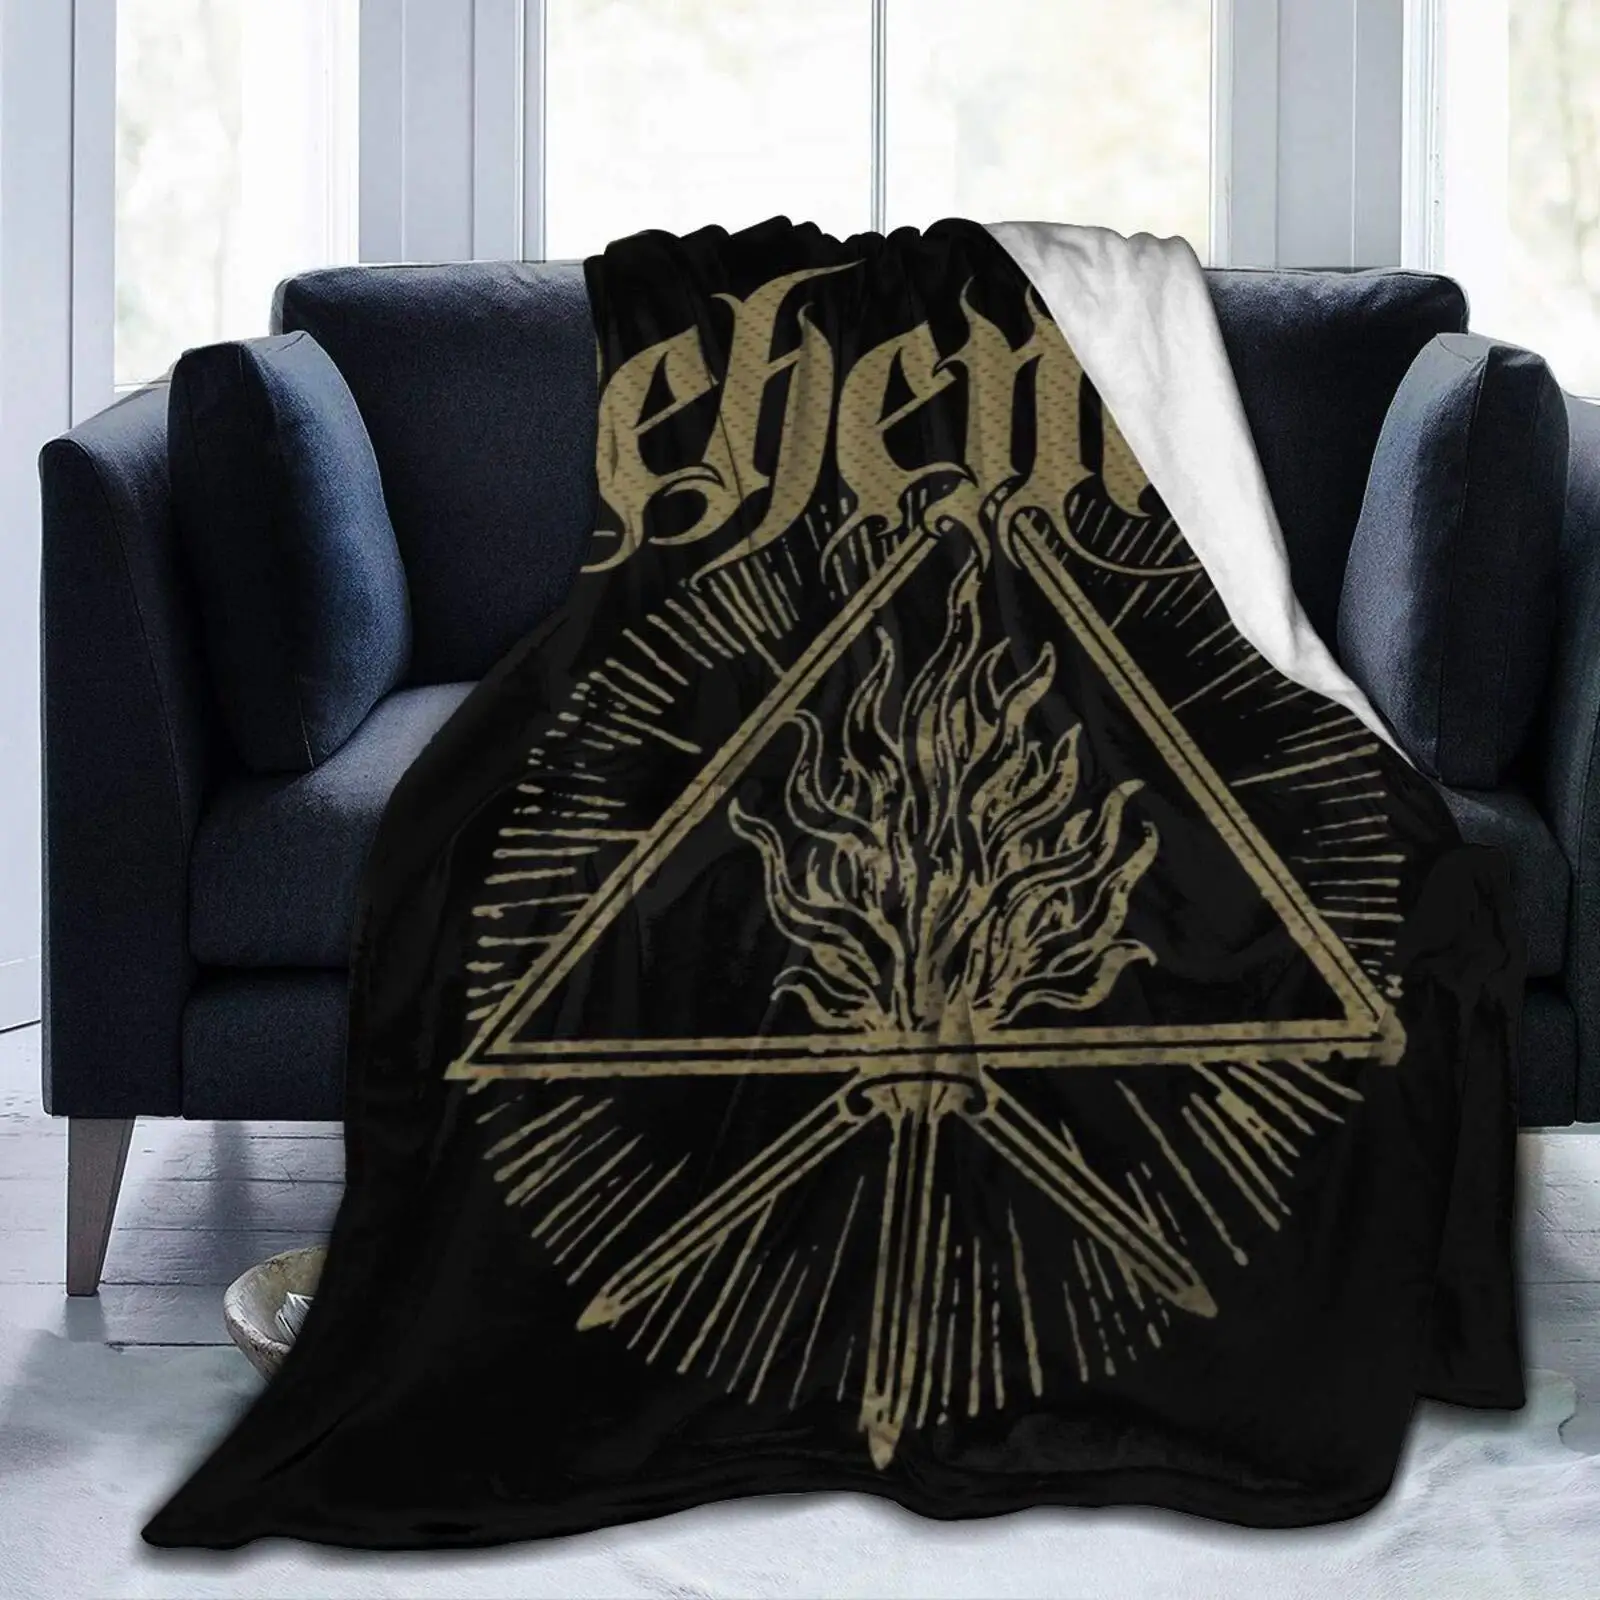 

Devildriver Bed Blanket for Couch/Living Room/Warm Winter Cozy Plush Throw Blankets for Adults Or Kids 80 X60